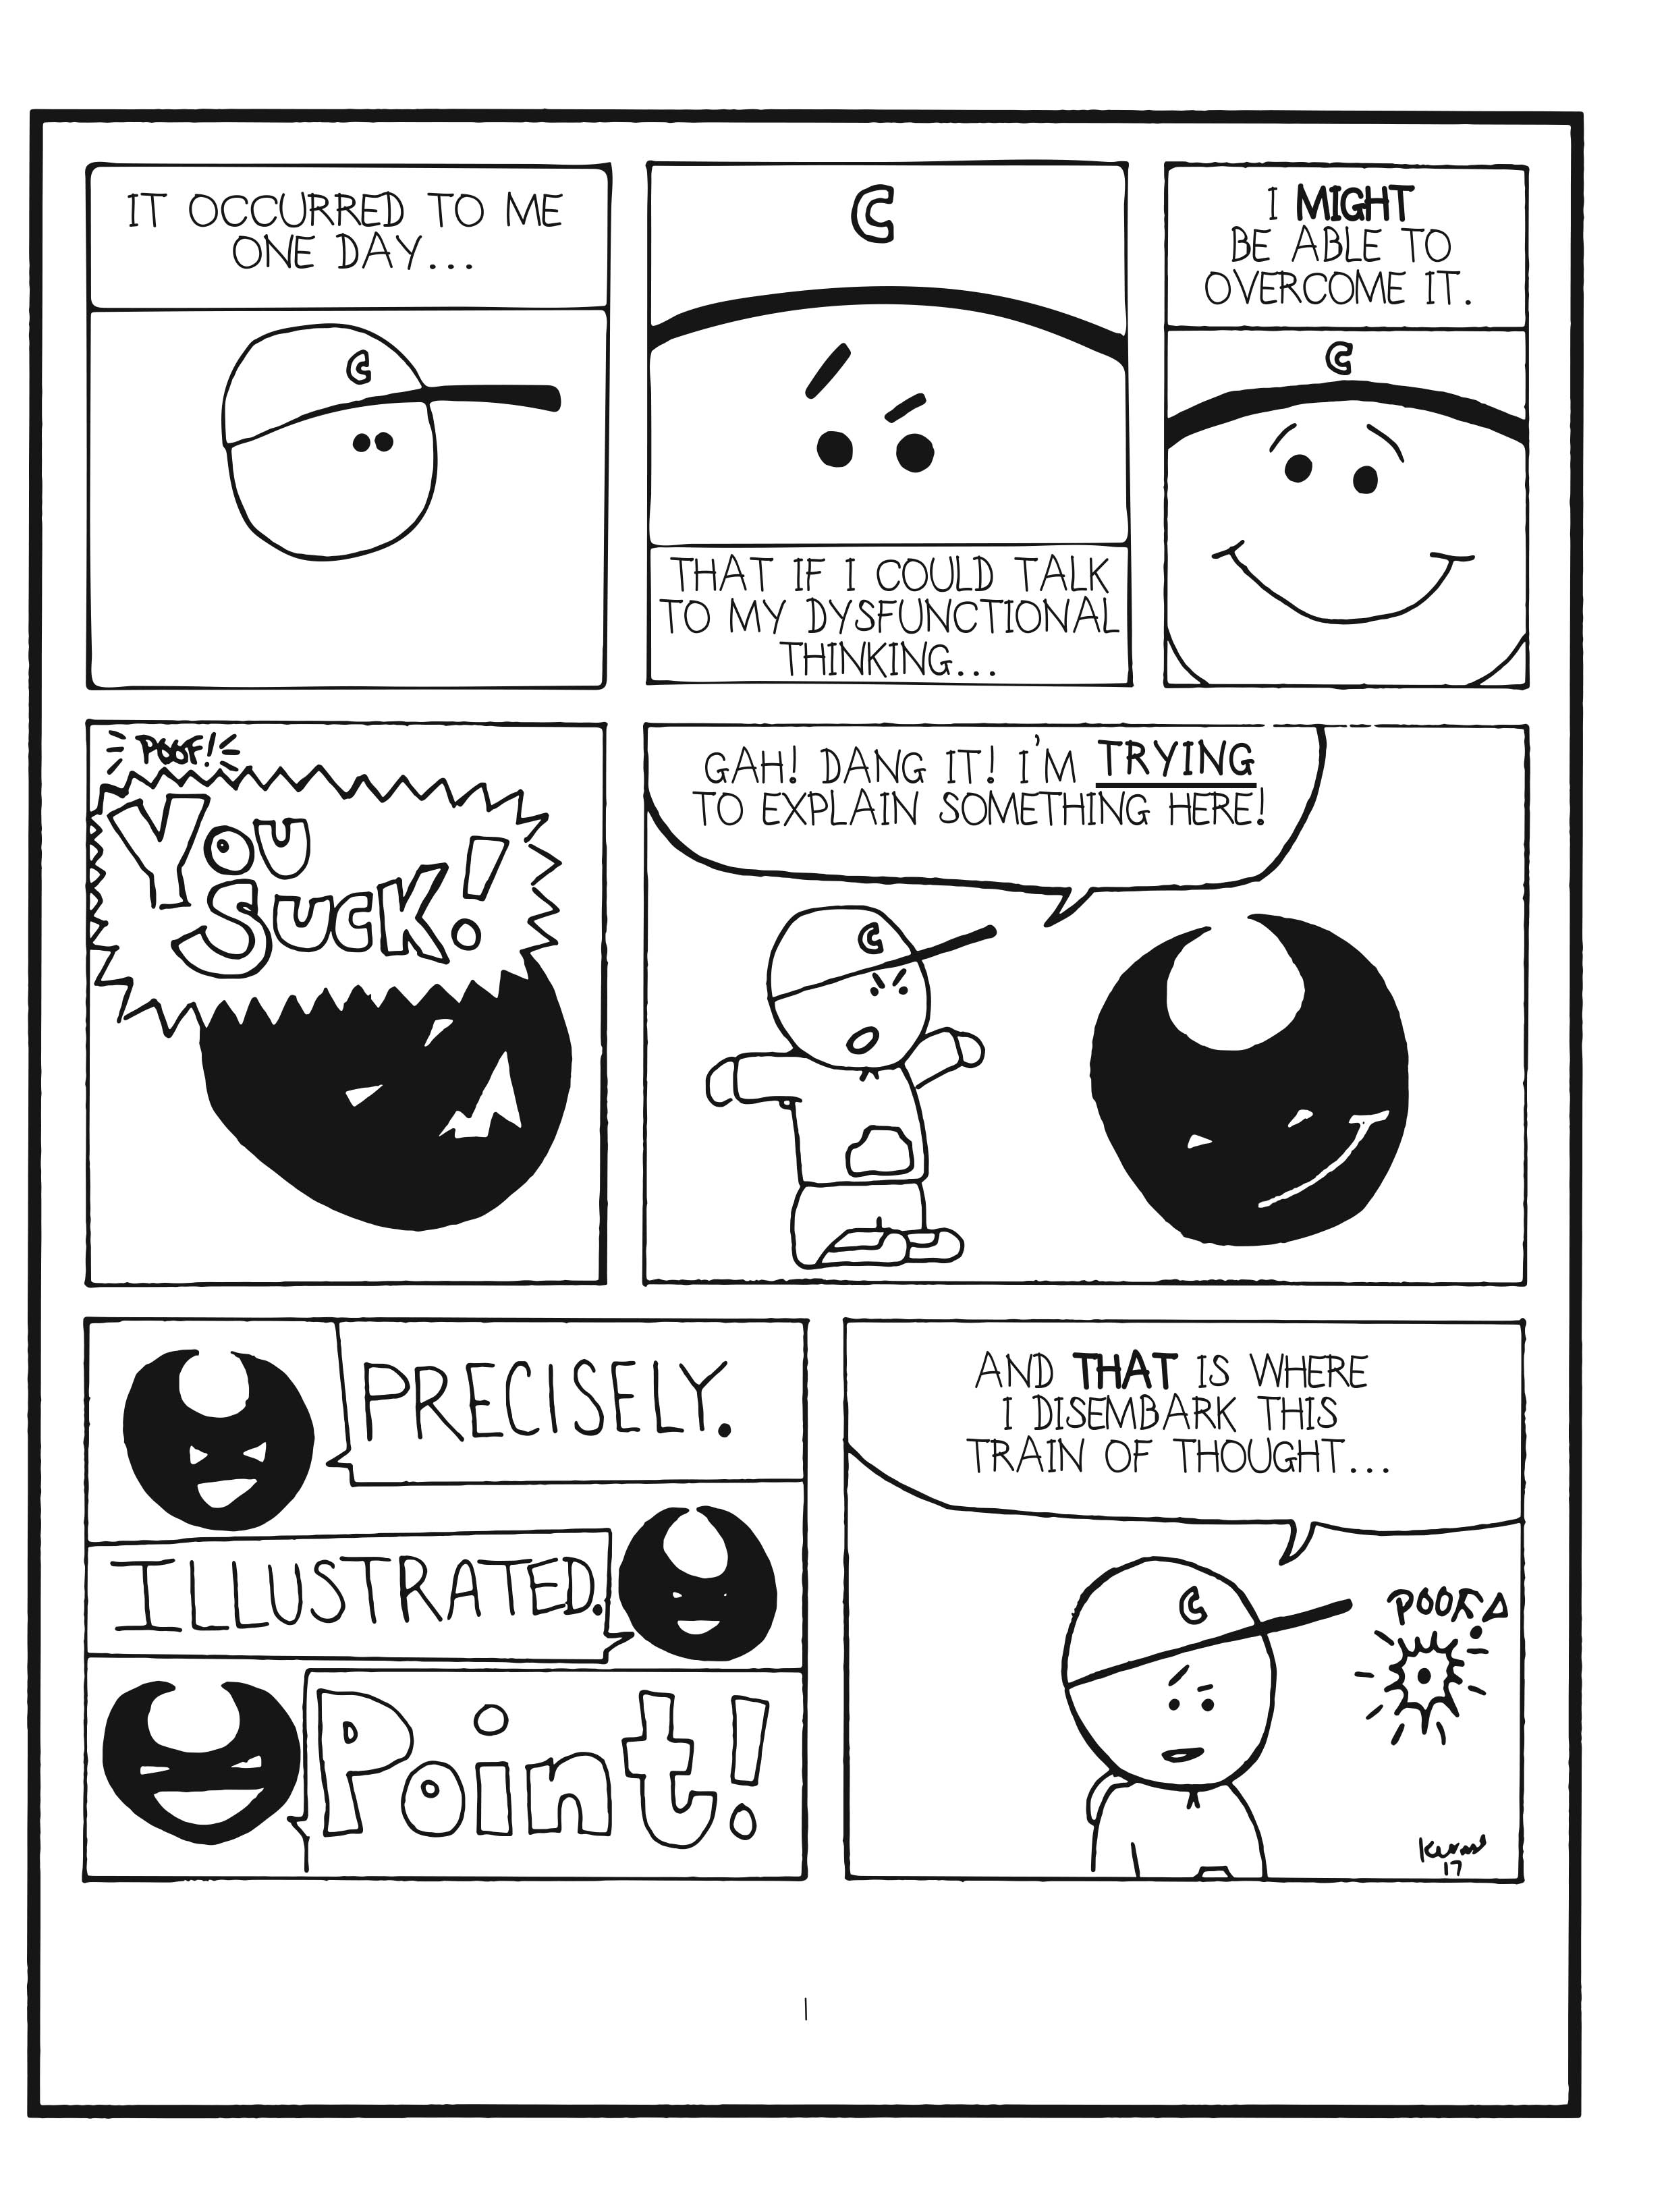 badbrain 1. 
panel 1. mainbrain says, it occurred to me one day. 
panel 2. that if i could talk to my dysfunctional thinking. 
panel 3. i MIGHT be able to overcome it. 
panel 4. poof! badbrain appears and shouts, YOU SUCK! 
panel 5. mainbrain says, gah! dang it! i'm trying to explain something here! 
panel 6. badbrain says precisely. illustrated. POINT! 
panel 7. mainbrain says, and THAT is where i disembark this train of thought. badbrain disappears. poof!